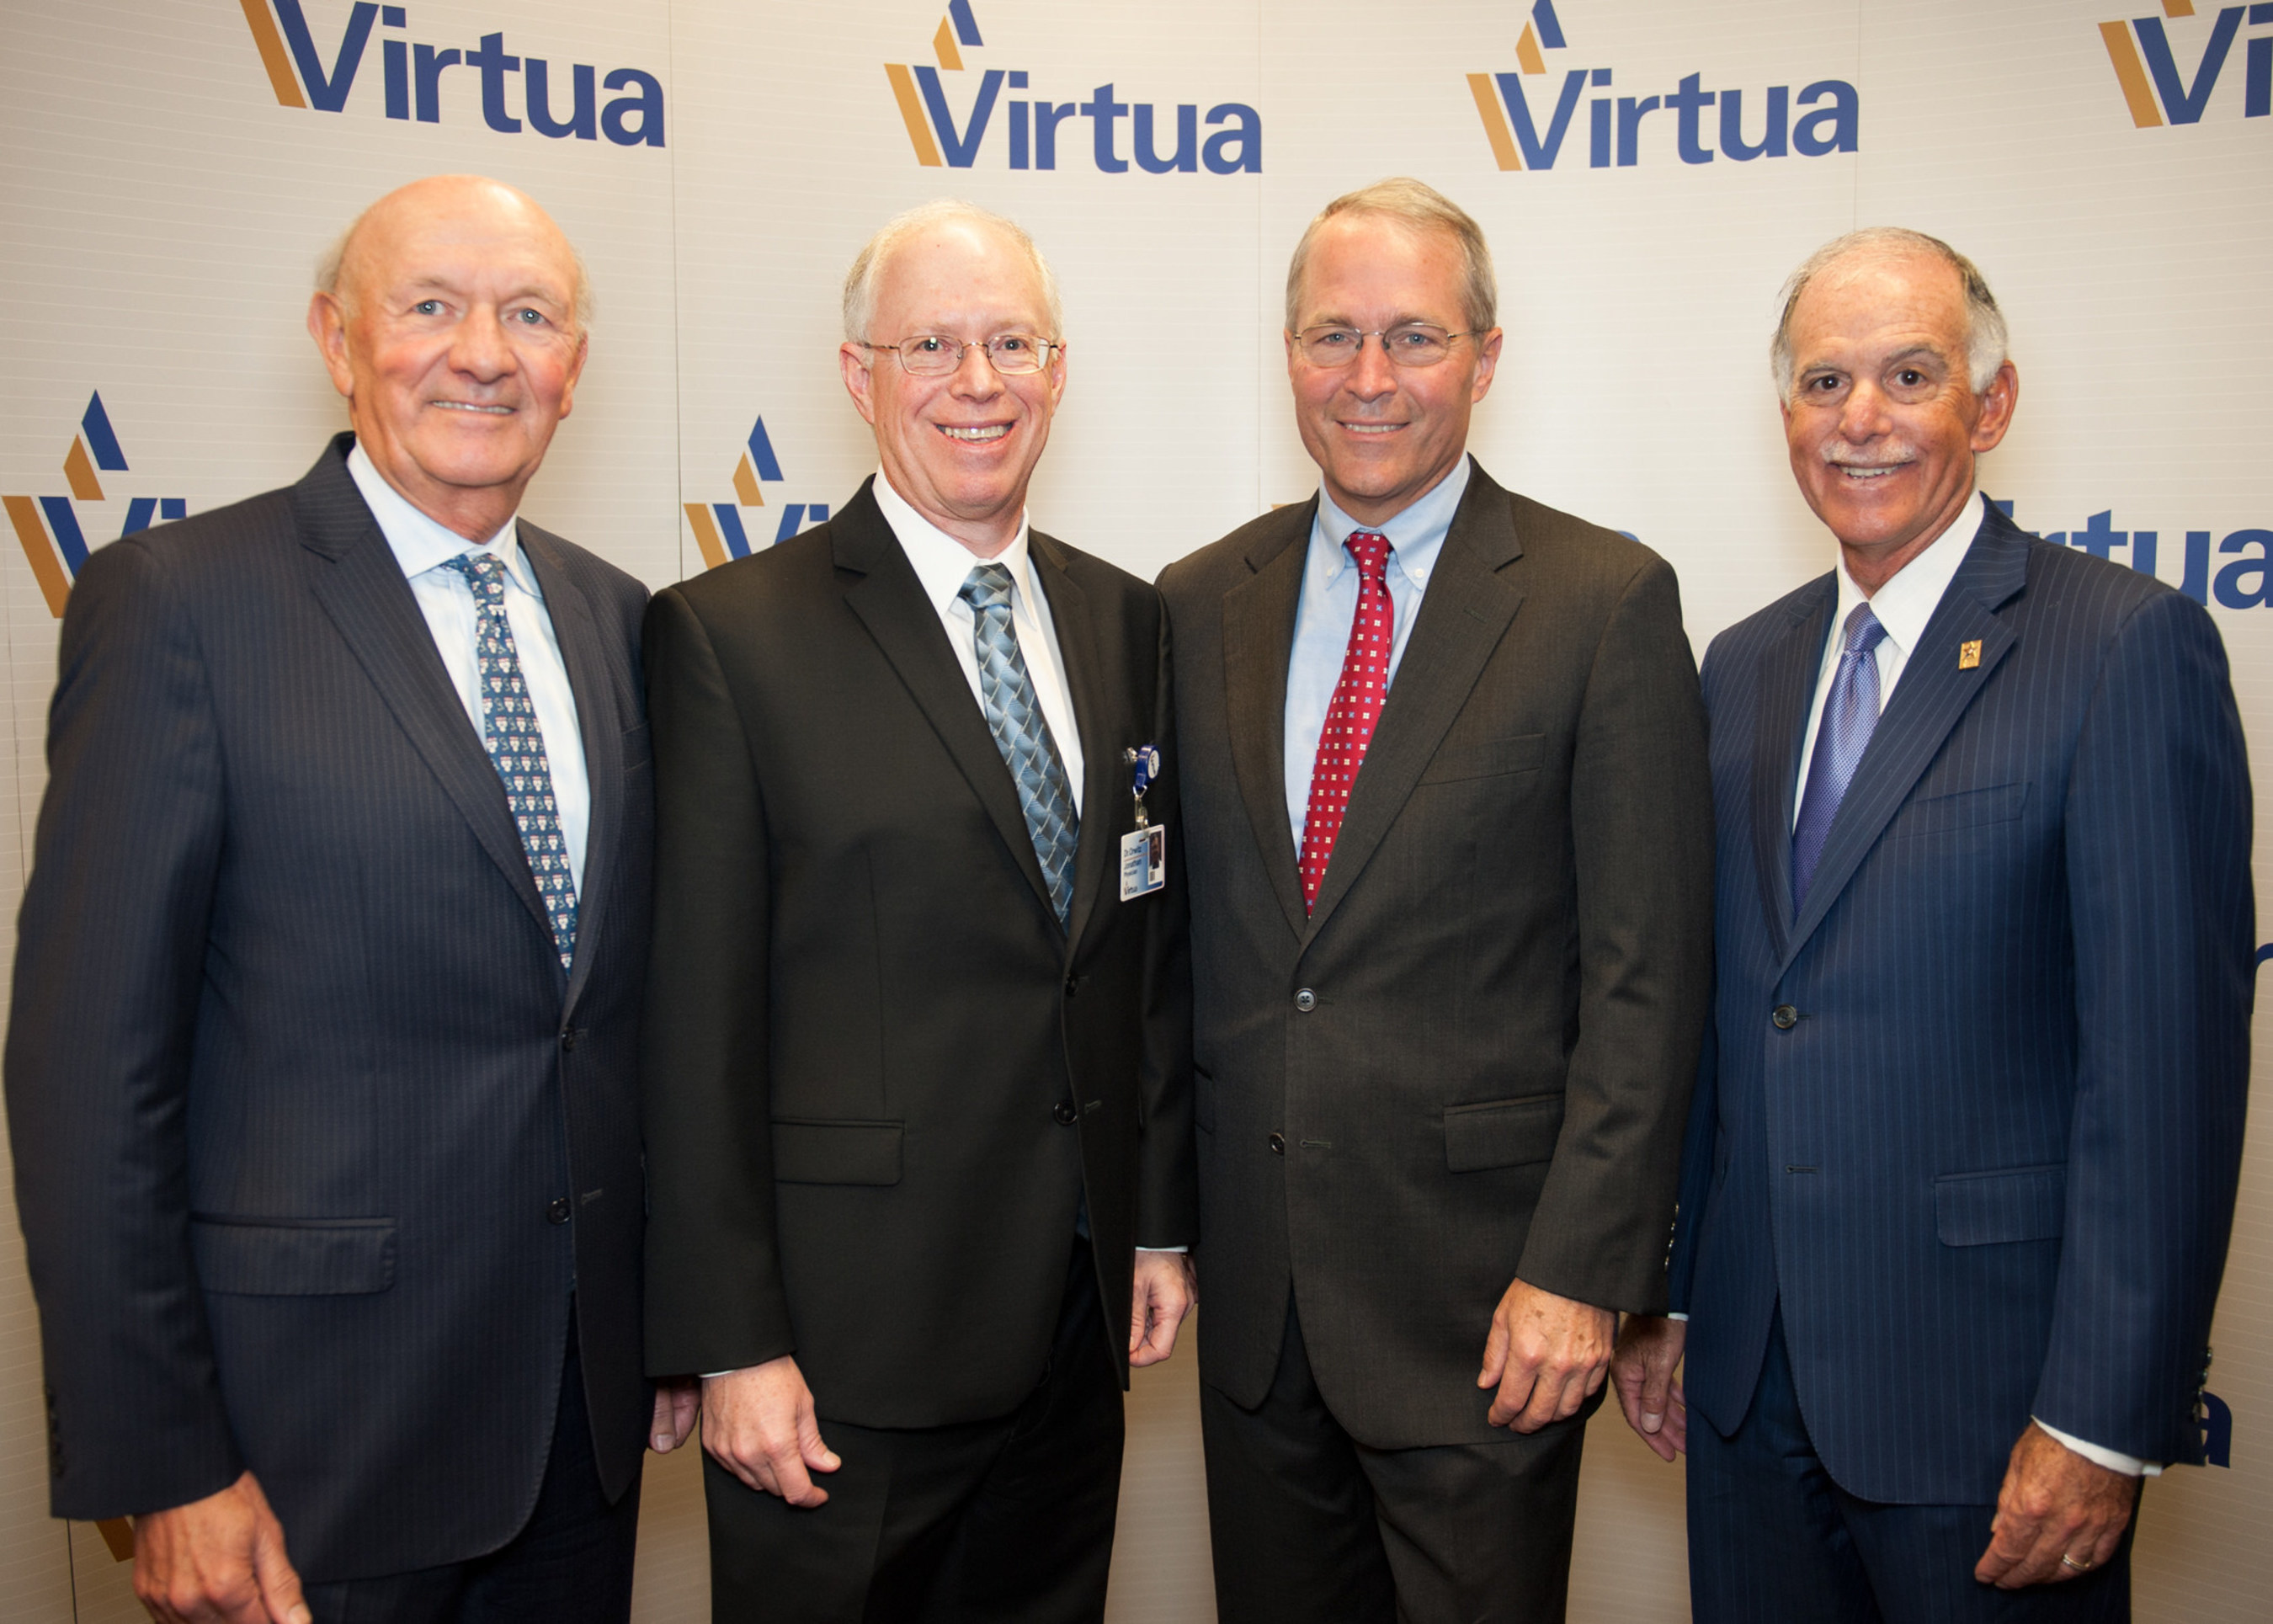 Leadership from Virtua and Penn Medicine spoke at an event announcing their strategic alliance for cancer and neurosciences patients. From left to right: Ralph Muller, CEO of Penn Medicine; Dr. Jonathan Orwitz, Medical Director of Neurology at Virtua; Dr. Sean Grady, Chairman, Department of Neurosurgery at Penn Medicine; and Richard P. Miller, President & CEO at Virtua.